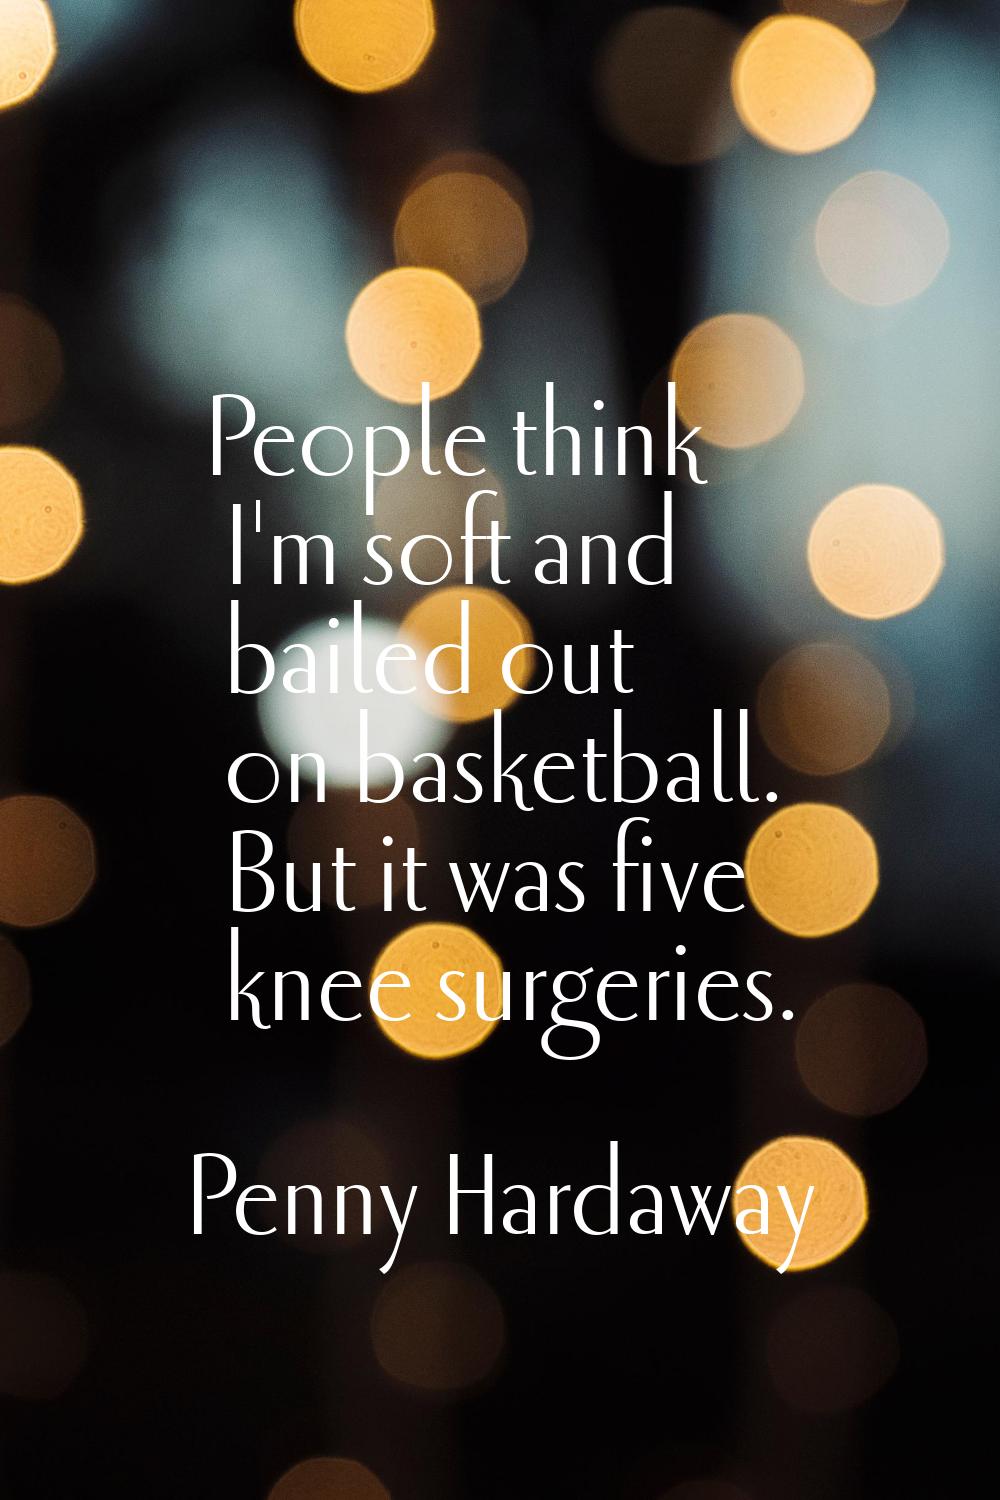 People think I'm soft and bailed out on basketball. But it was five knee surgeries.